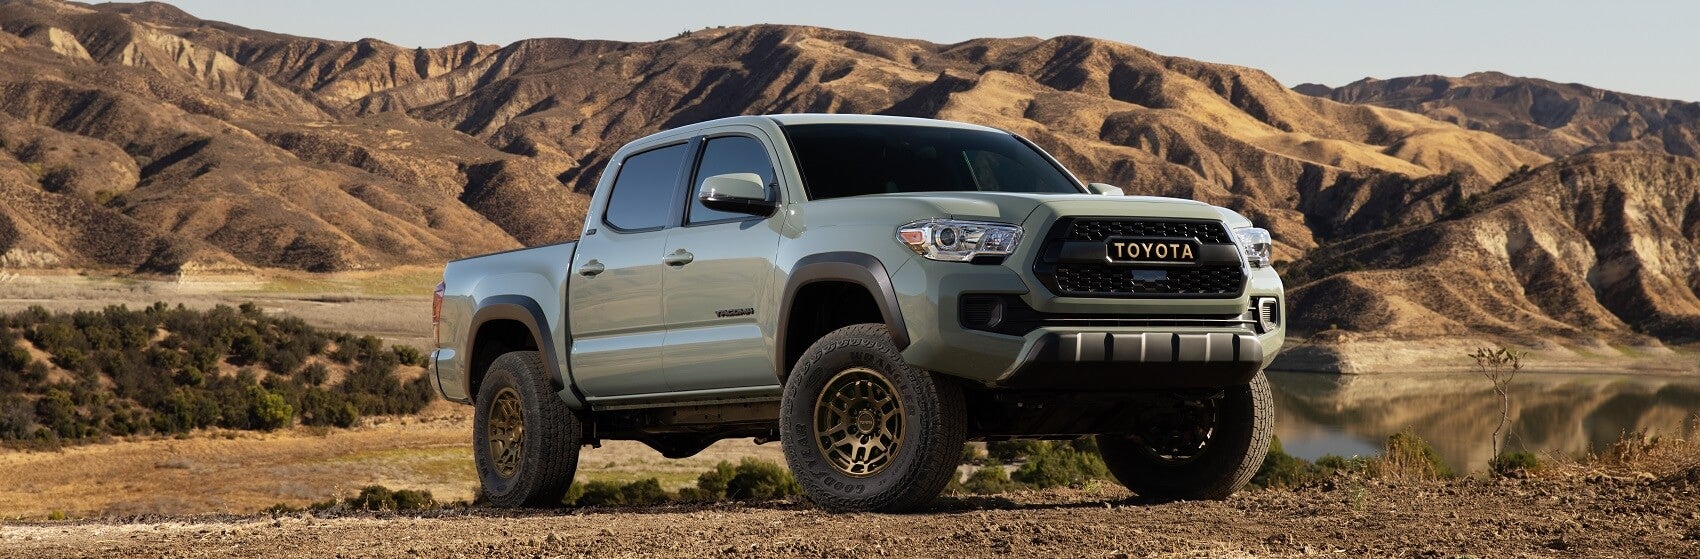 Toyota Tacoma Safety Features Review